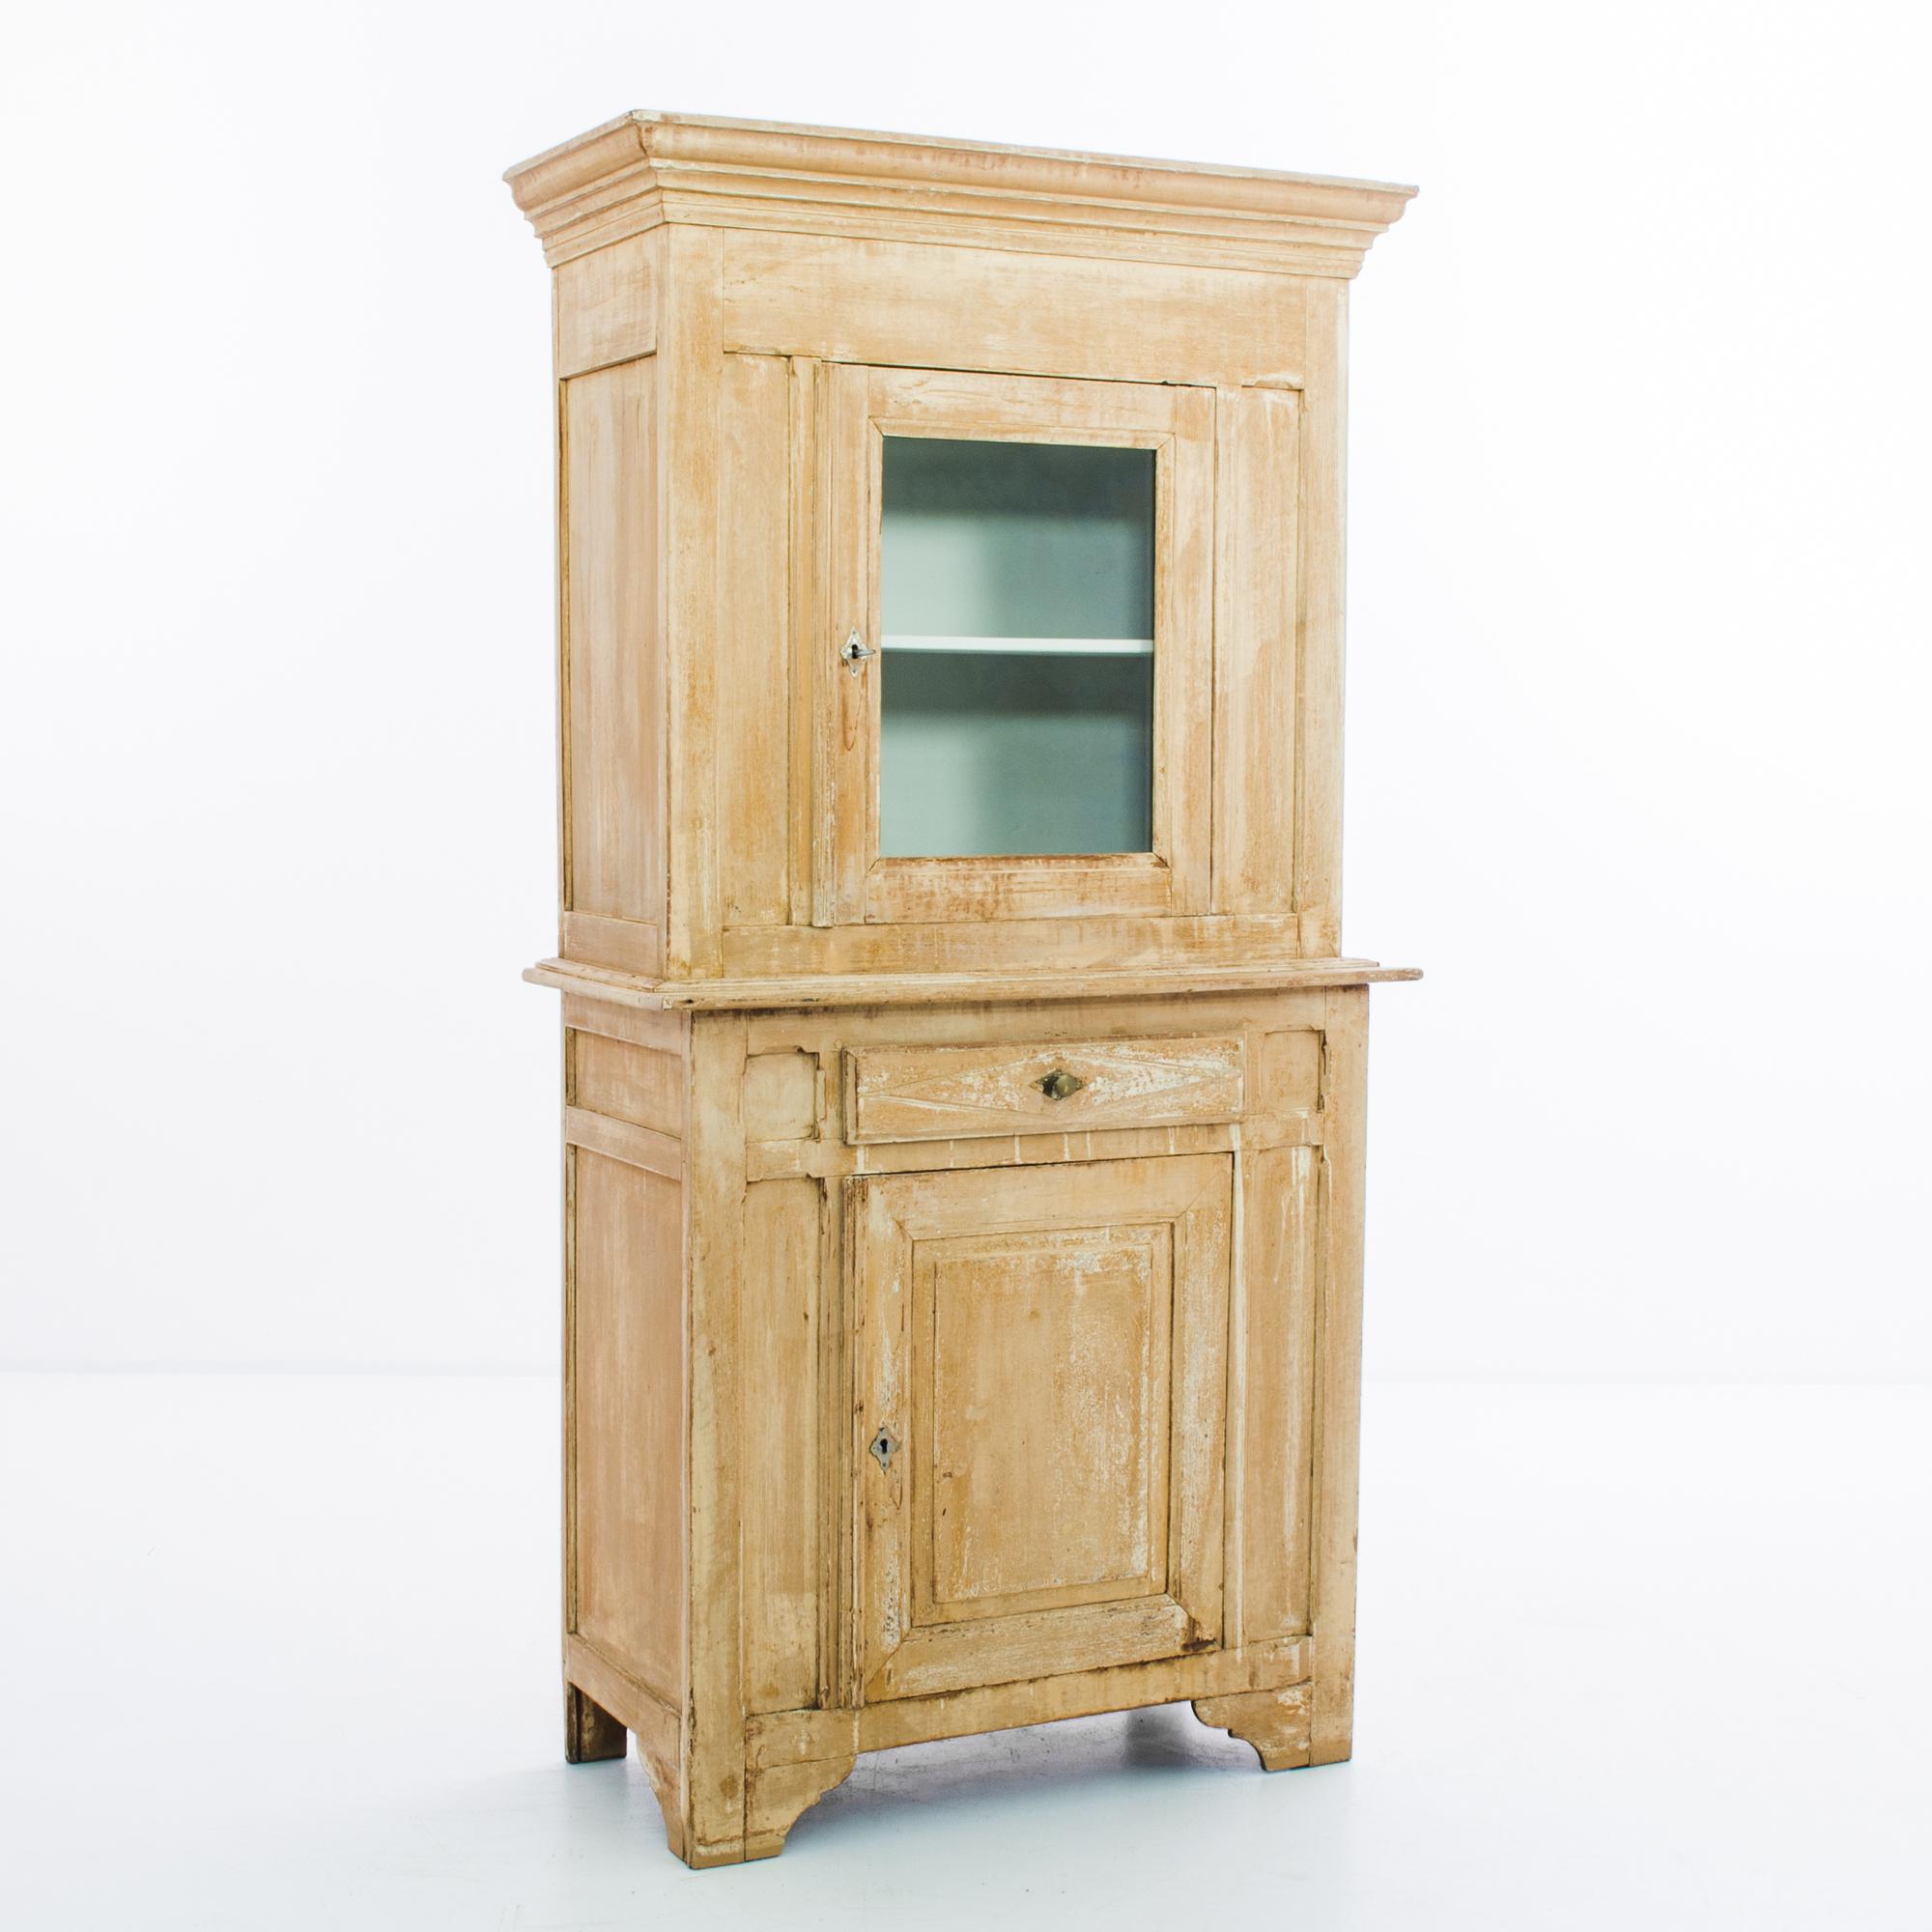 French Provincial Antique French Wooden Cabinet